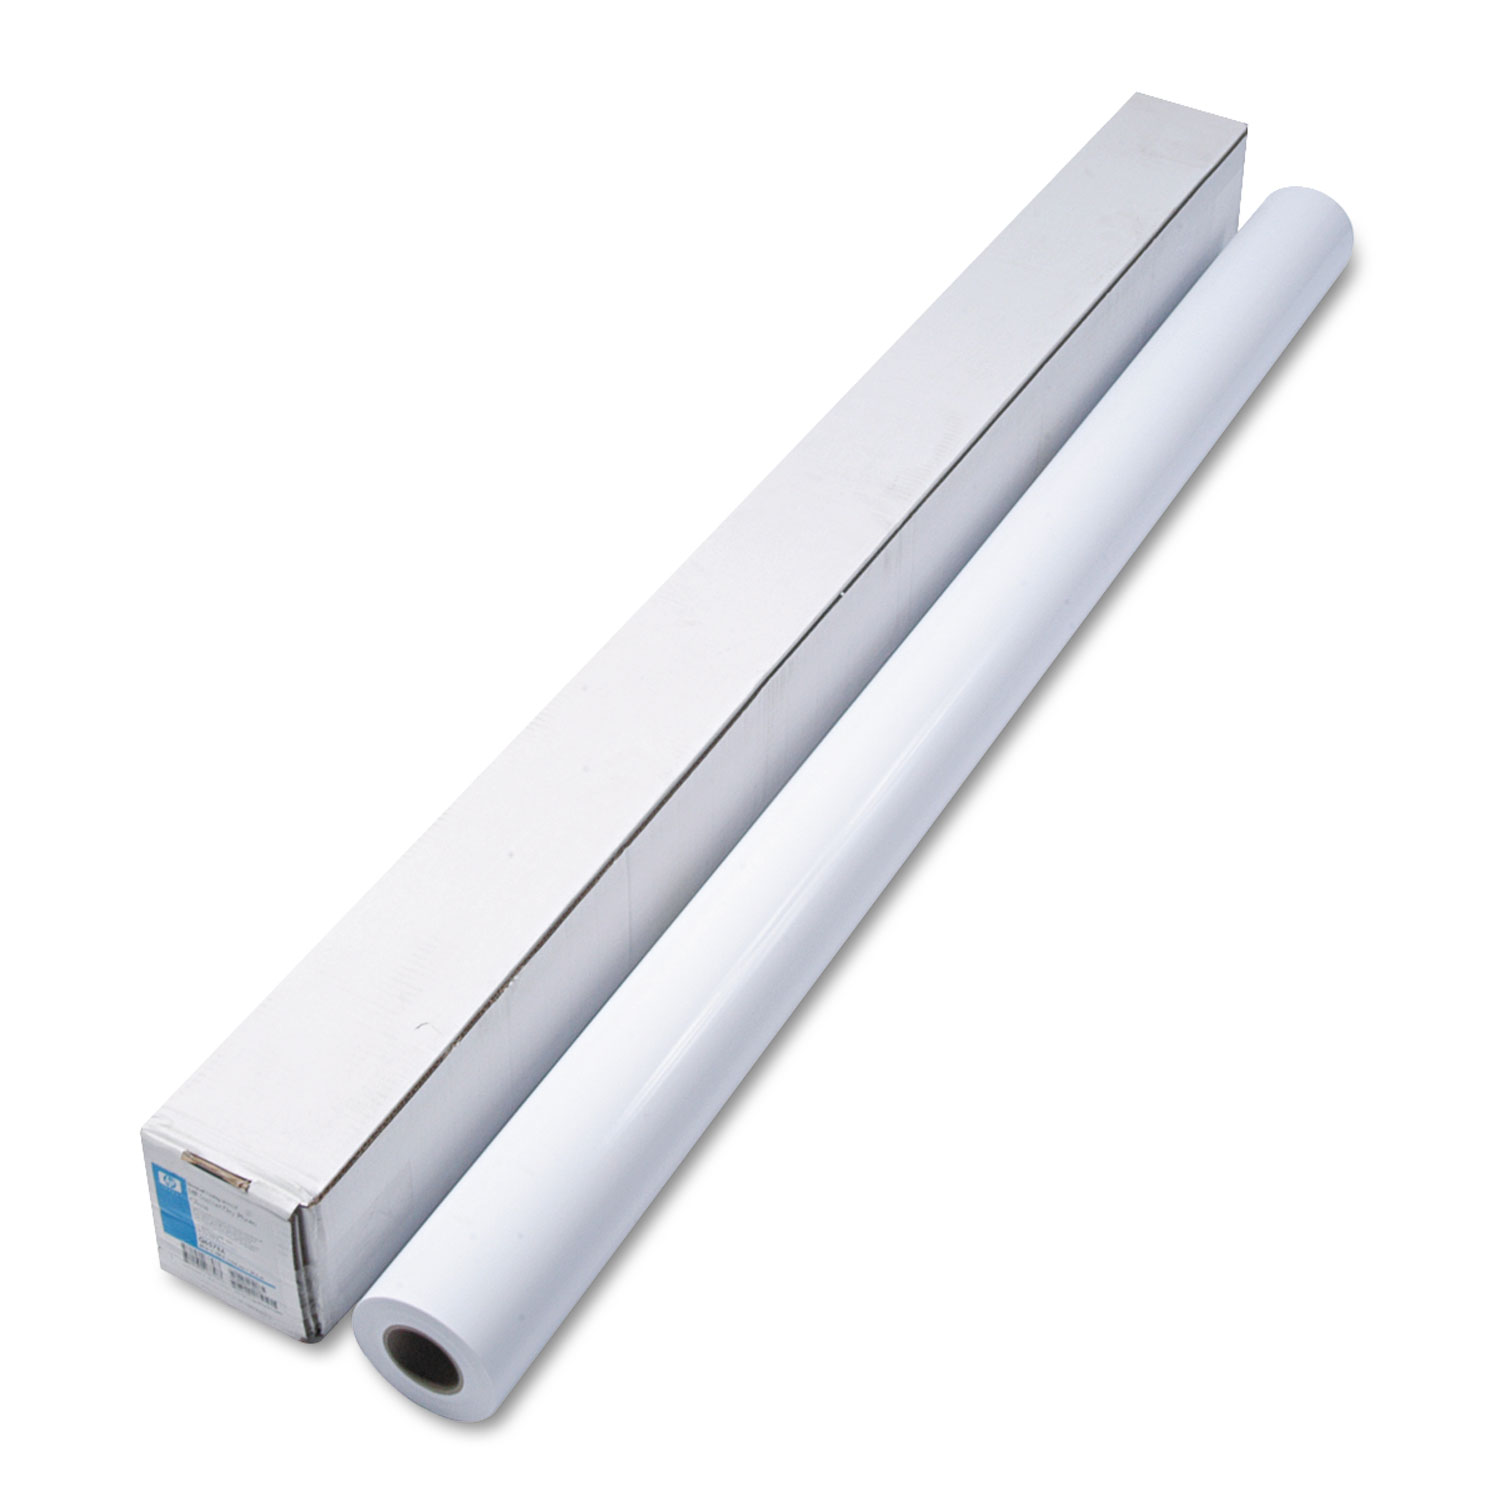  HP Q6578A DesignJet Large Format Paper for Inkjet Prints, 7 mil, 60 x 100 ft, Gloss White (HEWQ6578A) 